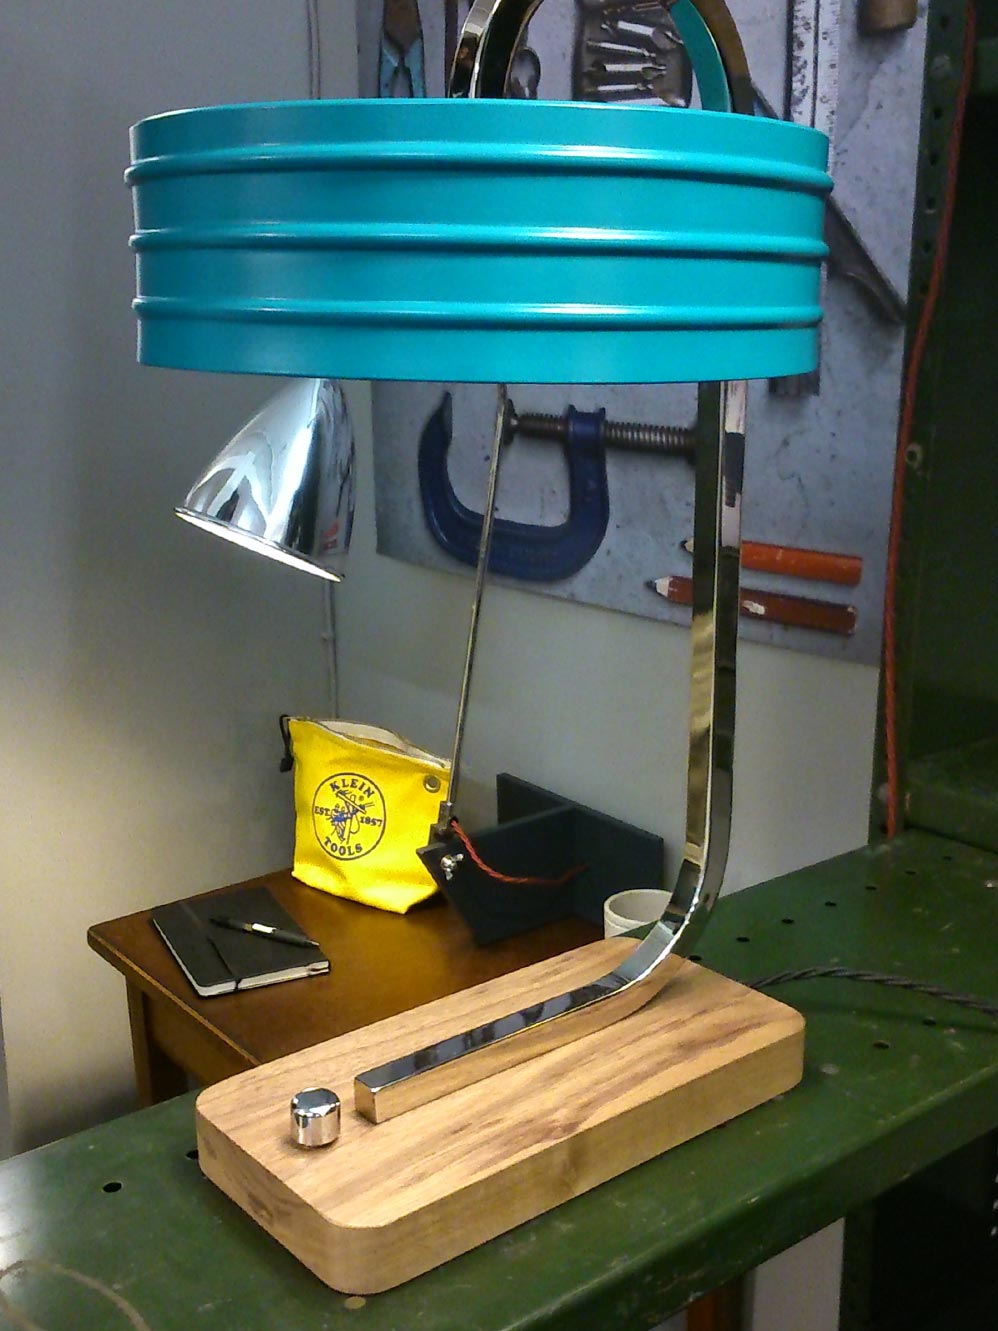  Here's The Otis Lamp by  Nocturne  who produced some fantastic vintage style products. 